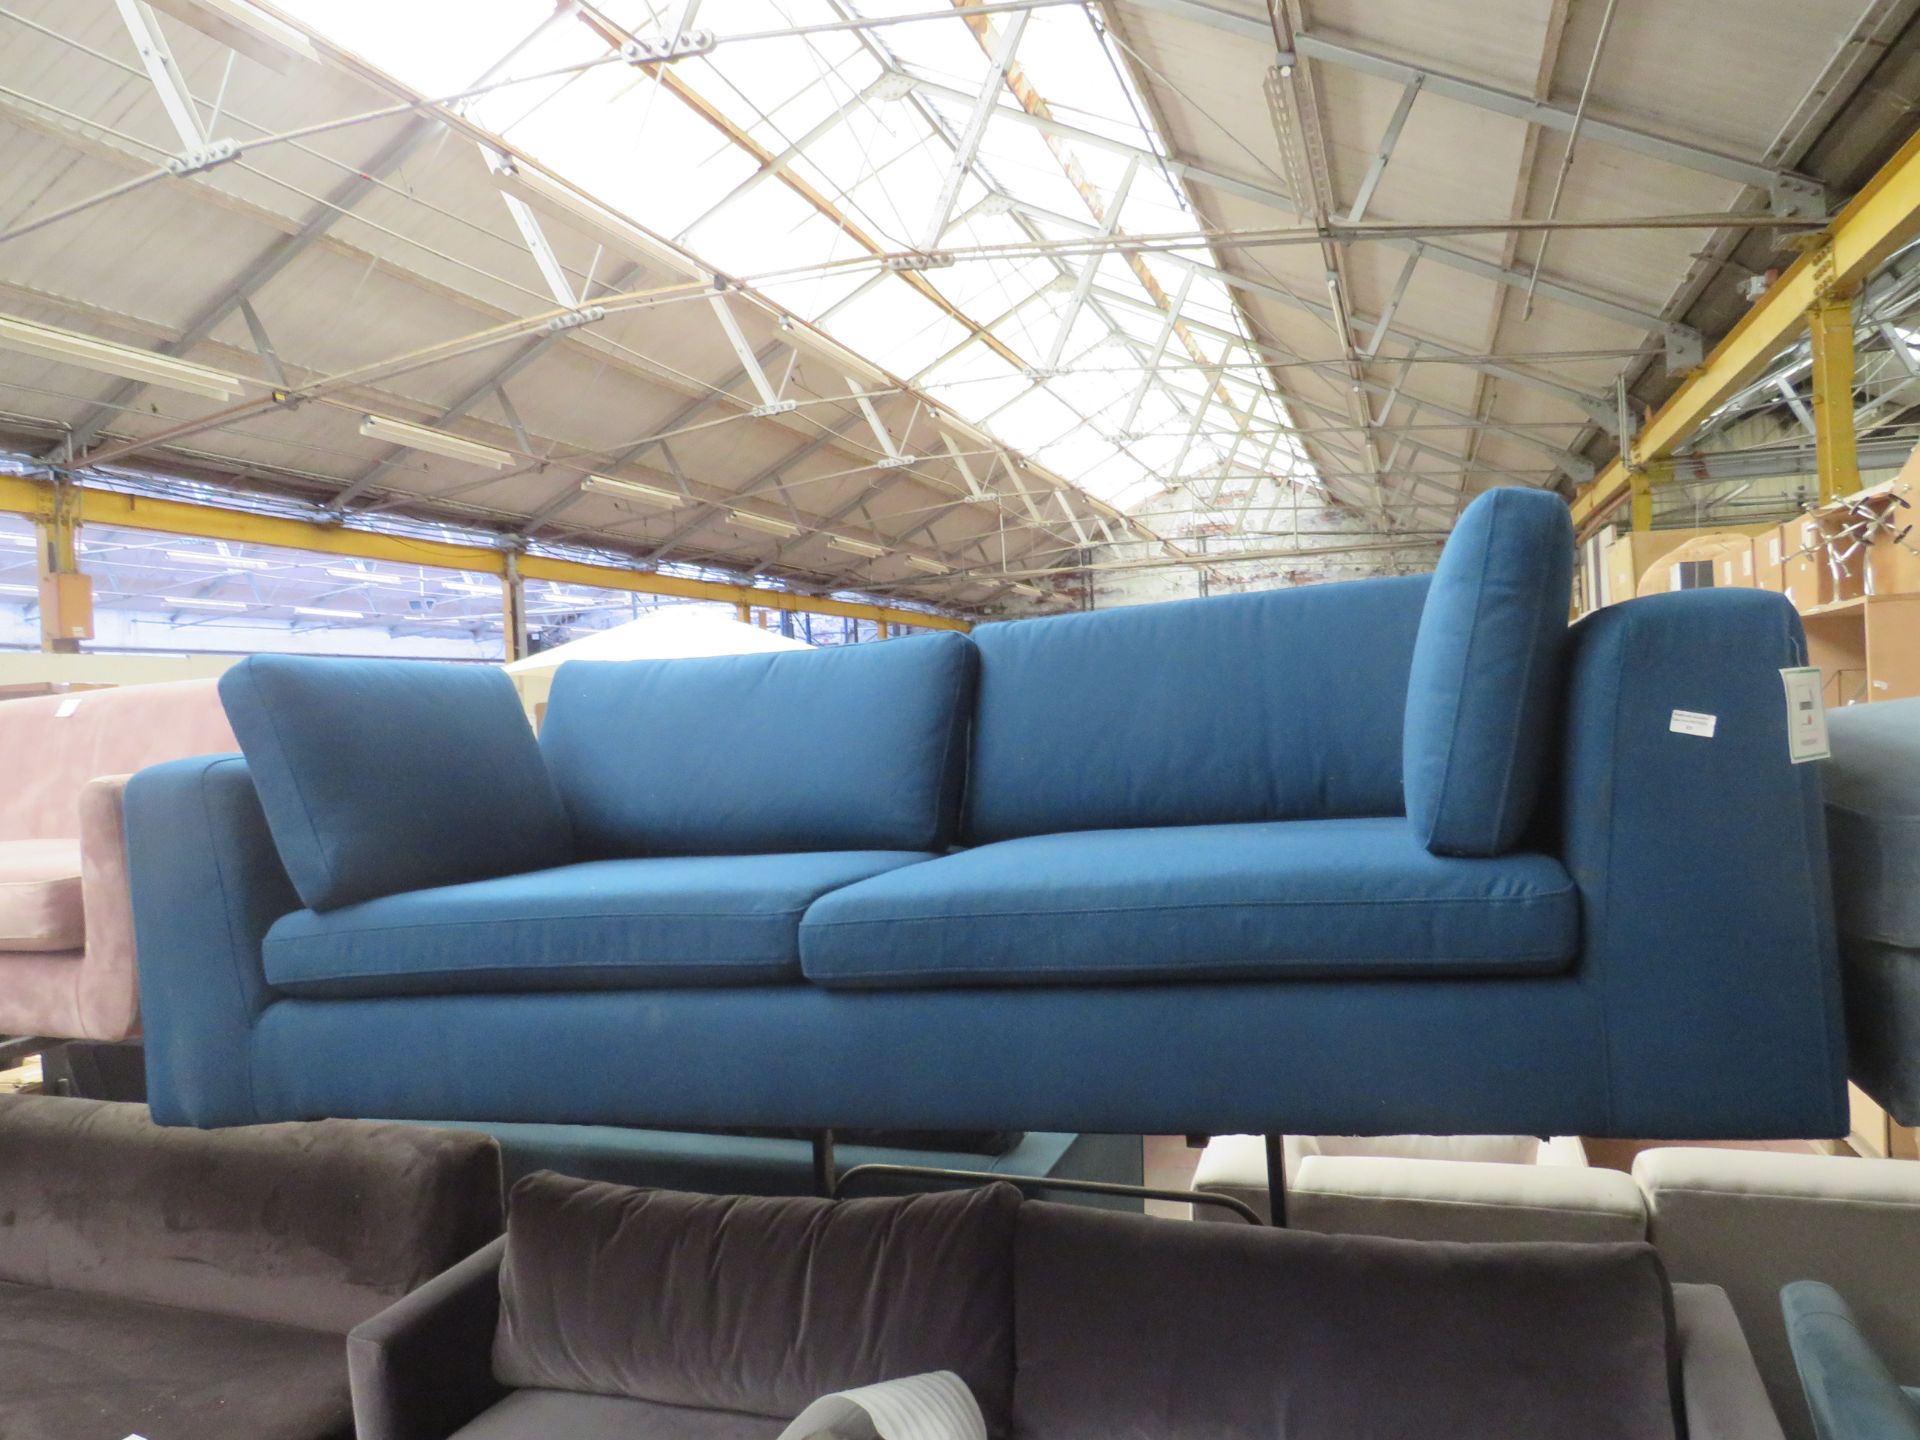 | 1X | MADE.COM 3 SEATER SOFA | no major damage (PLEASE NOTE, THIS DOES NOT PROVIDE ANY WARRANTY